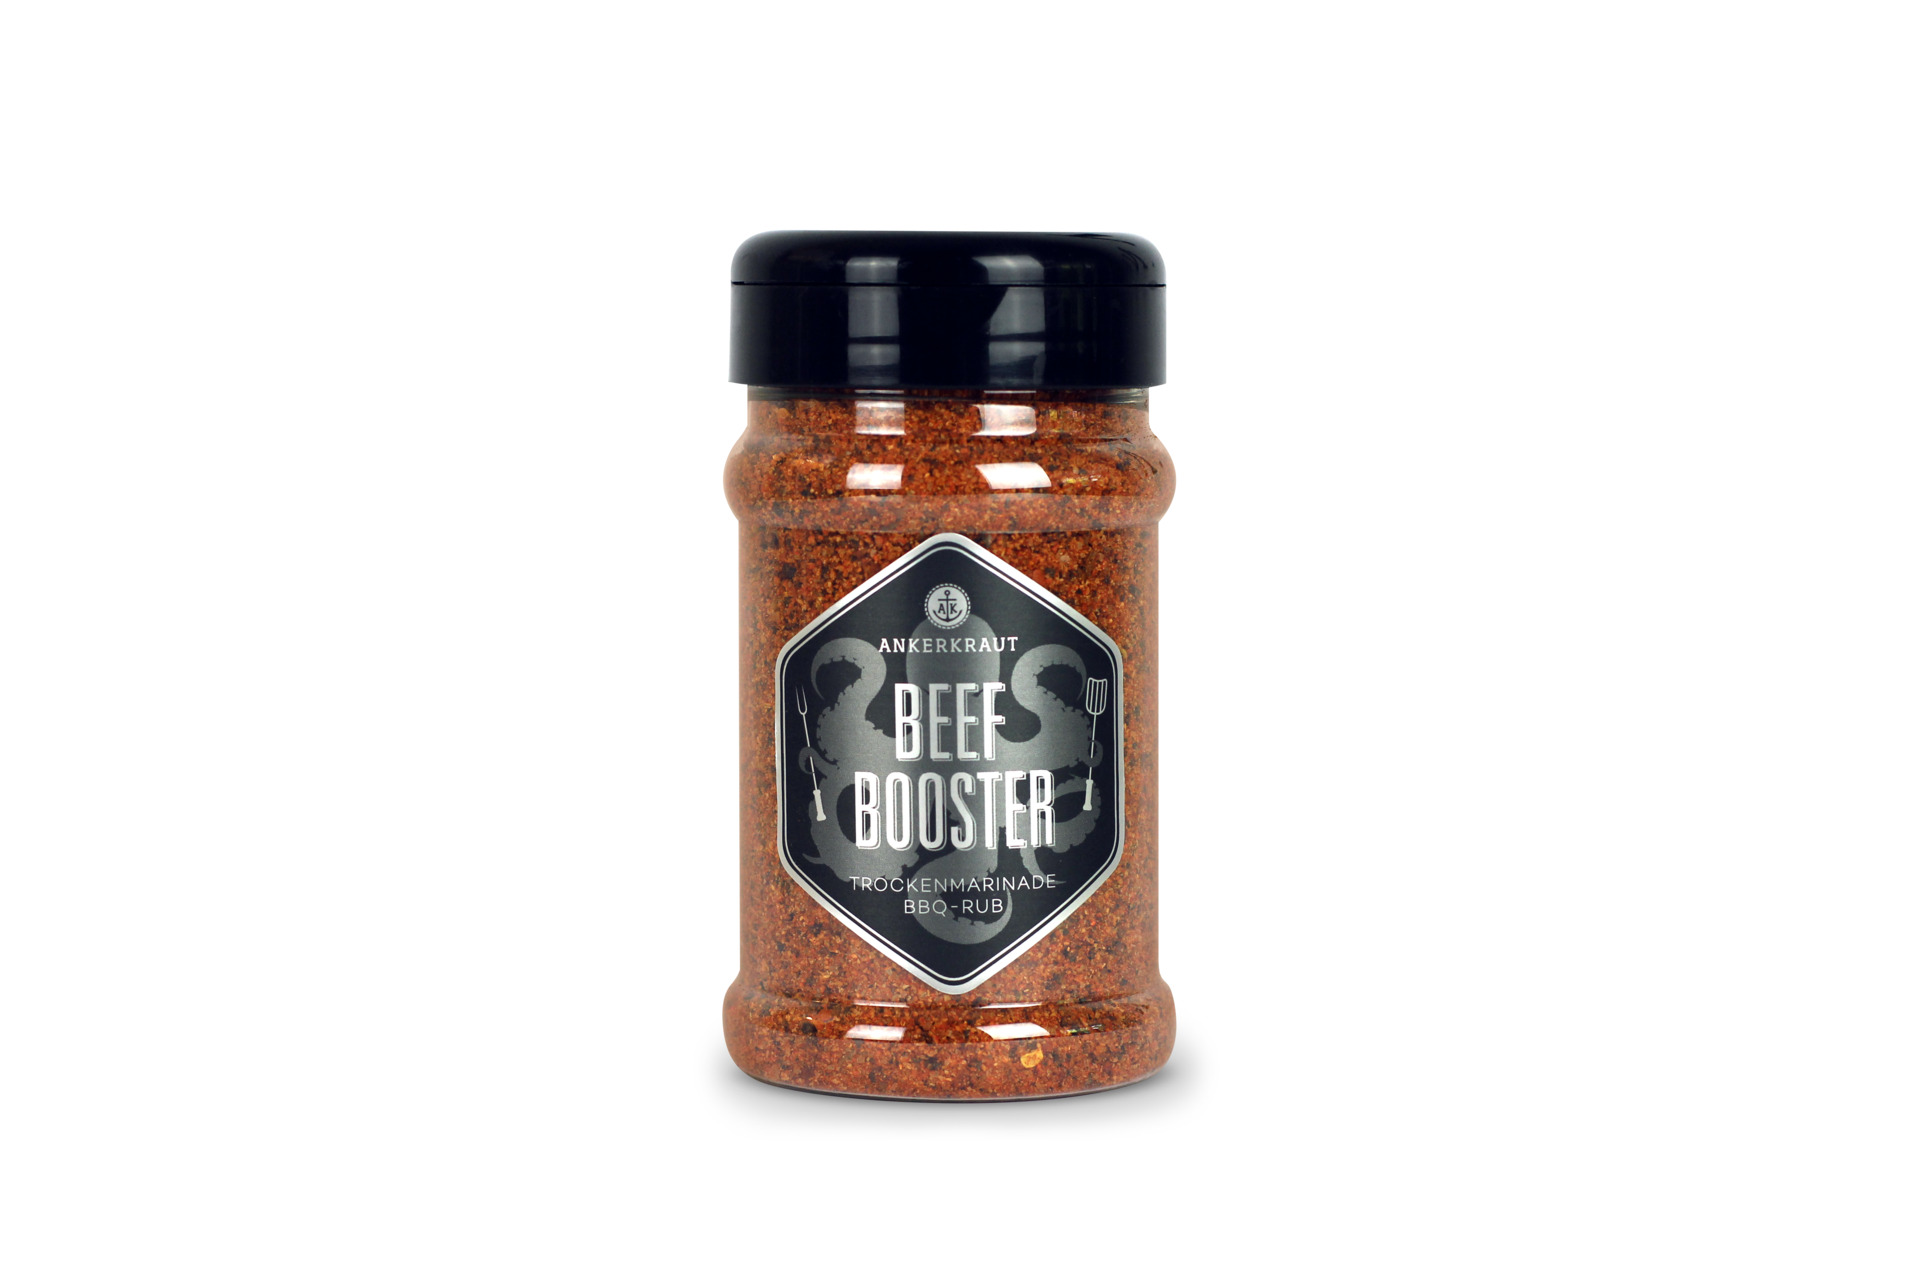 Beef Booster 230g